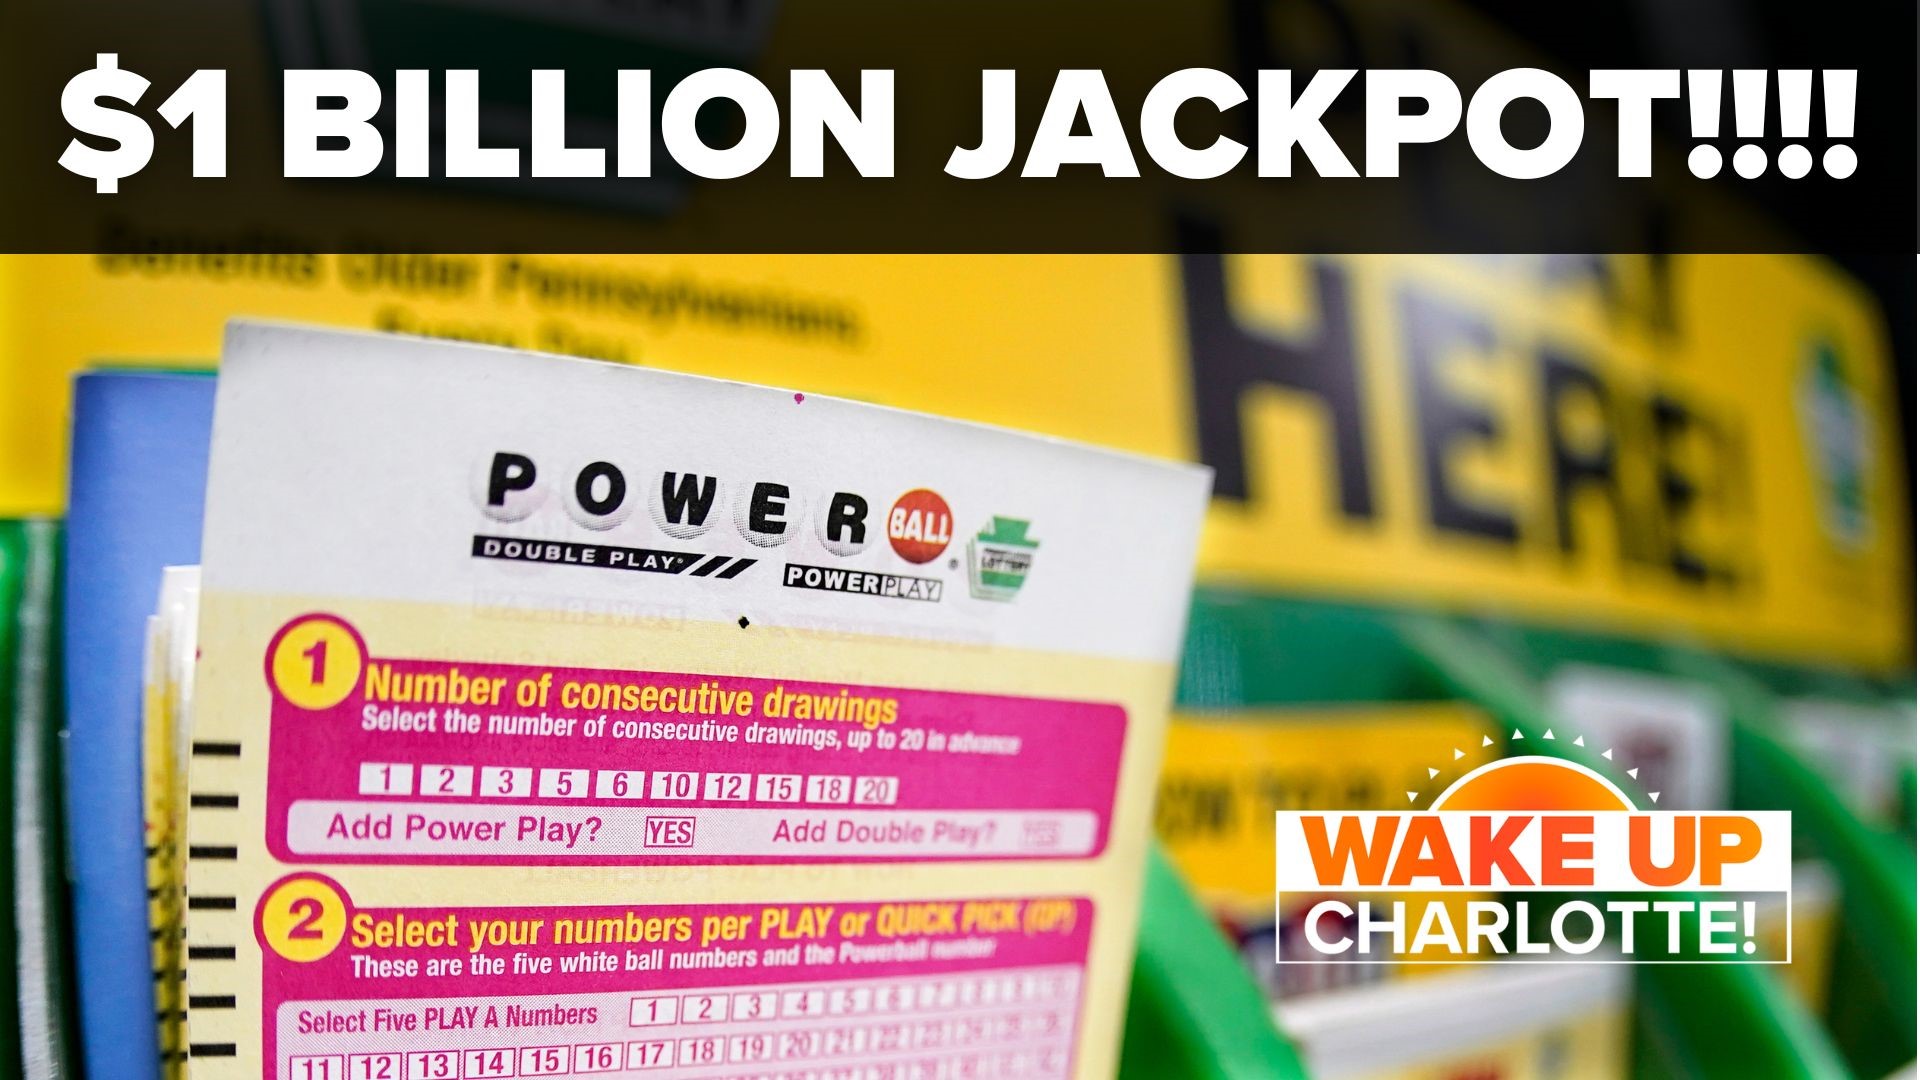 For the second time in 2022, there will be a $1 billion lottery jackpot in the U.S. after no one claimed Saturday's $825 million drawing.